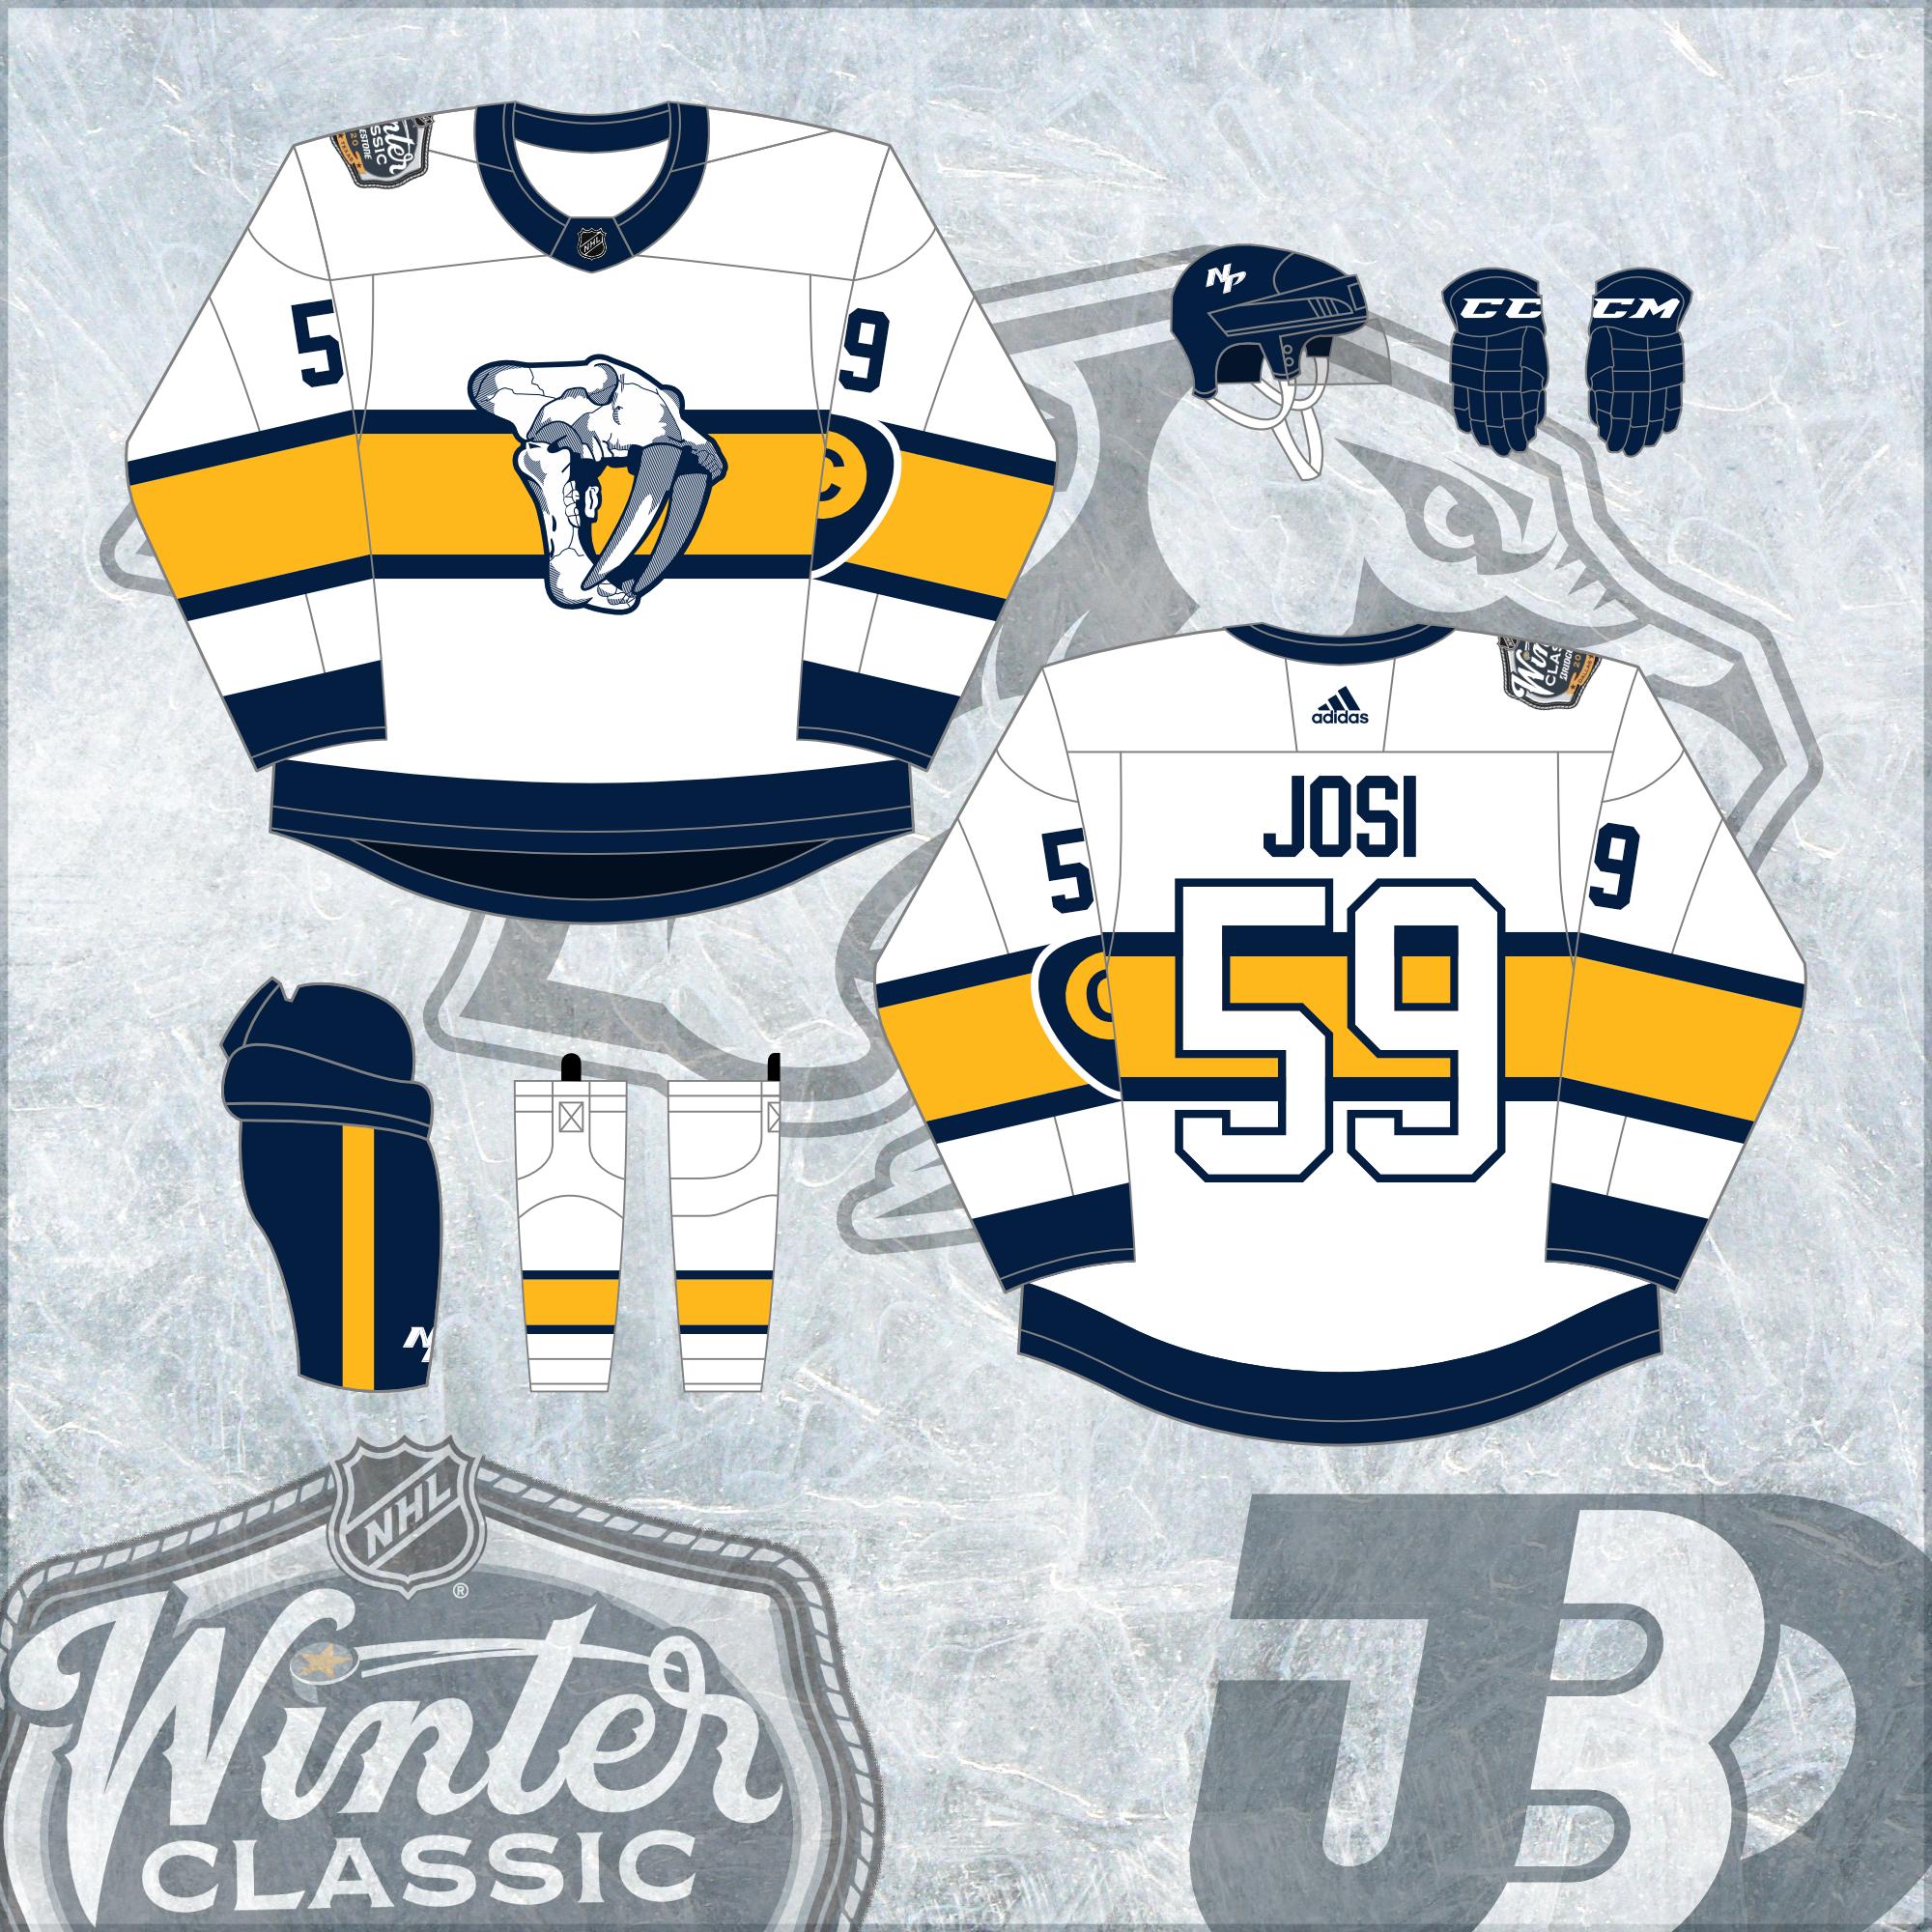 Justin Brolley on X: 2020 NHL Winter Classic Concept - DALLAS STARS //  NASHVILLE PREDATORS inspired by the first hockey franchise in each city,  the Dallas Texans (founded in 1945) and Nashville